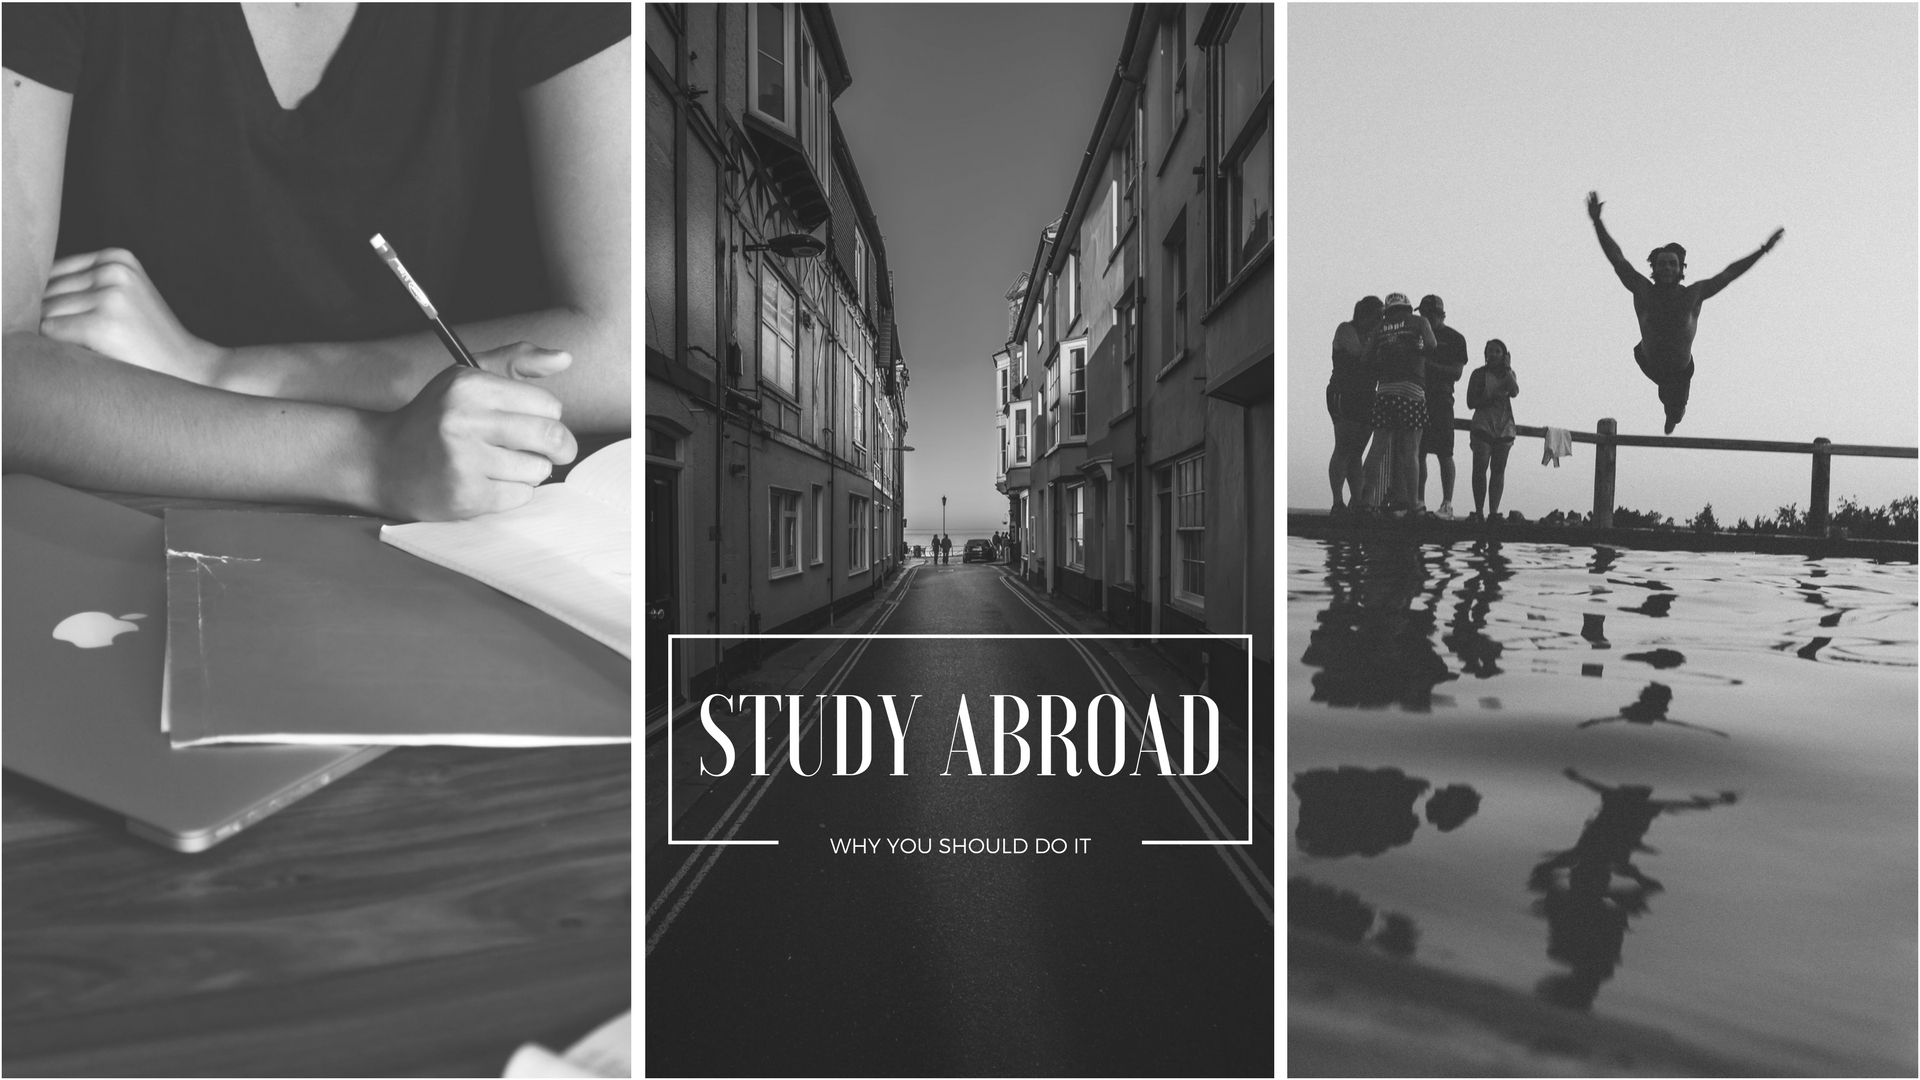 WHY STUDY ABROAD?